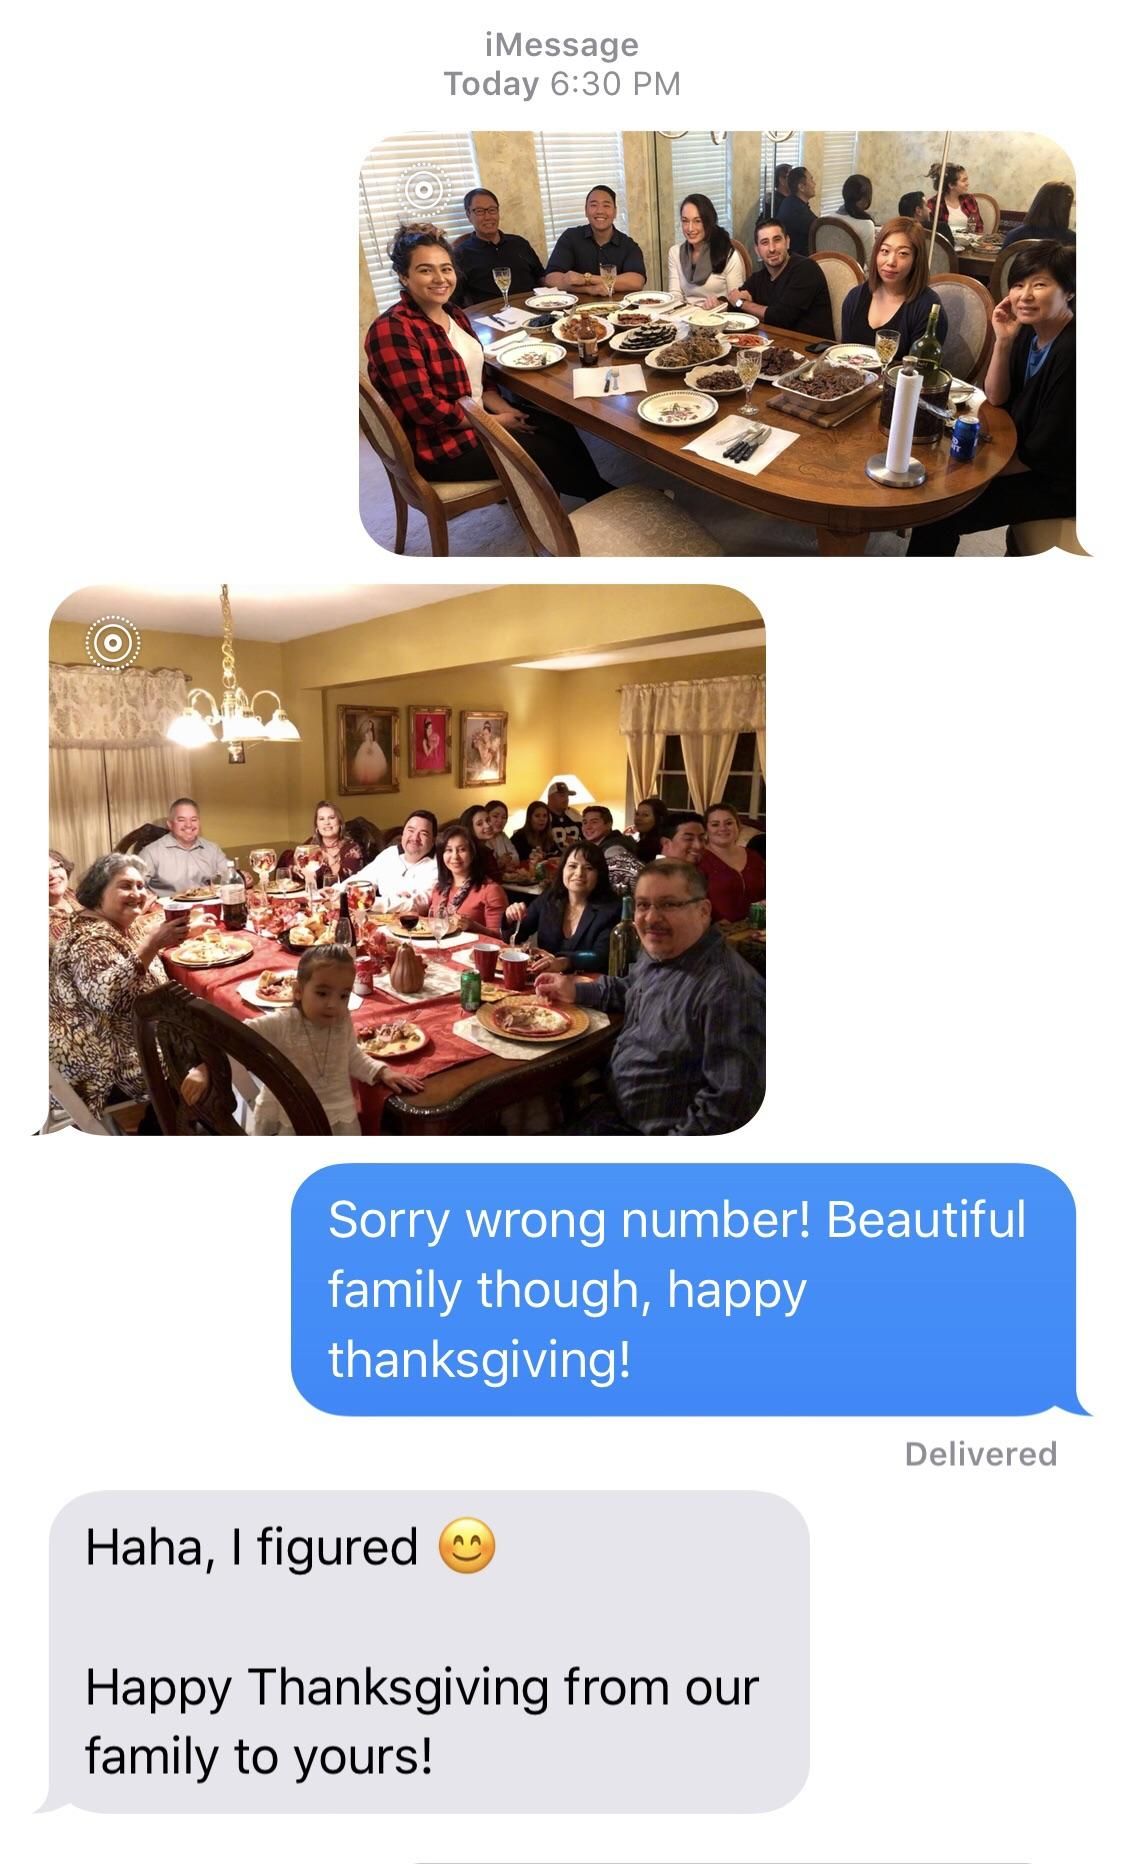 Sent the wrong number a family photo, was not disappointed, happy thanksgiving y’all!